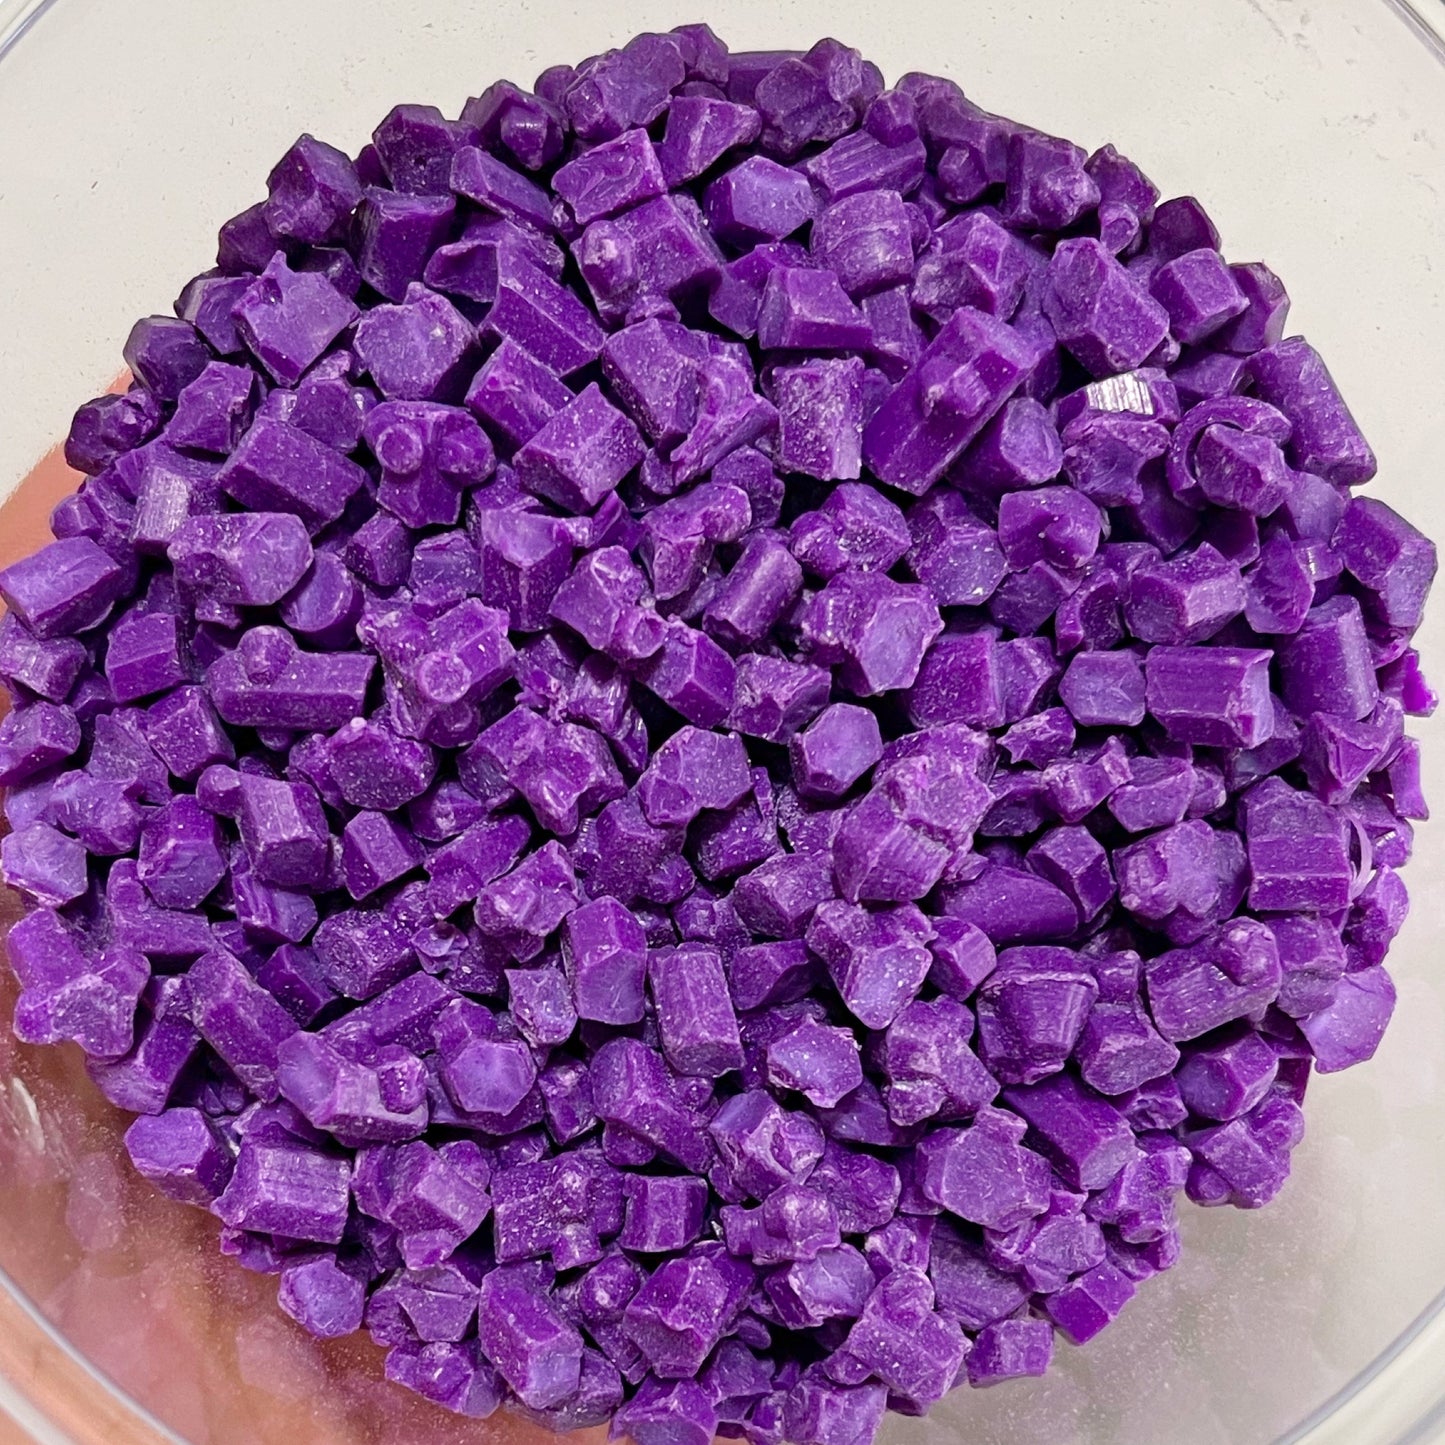 Solid colored silica beads